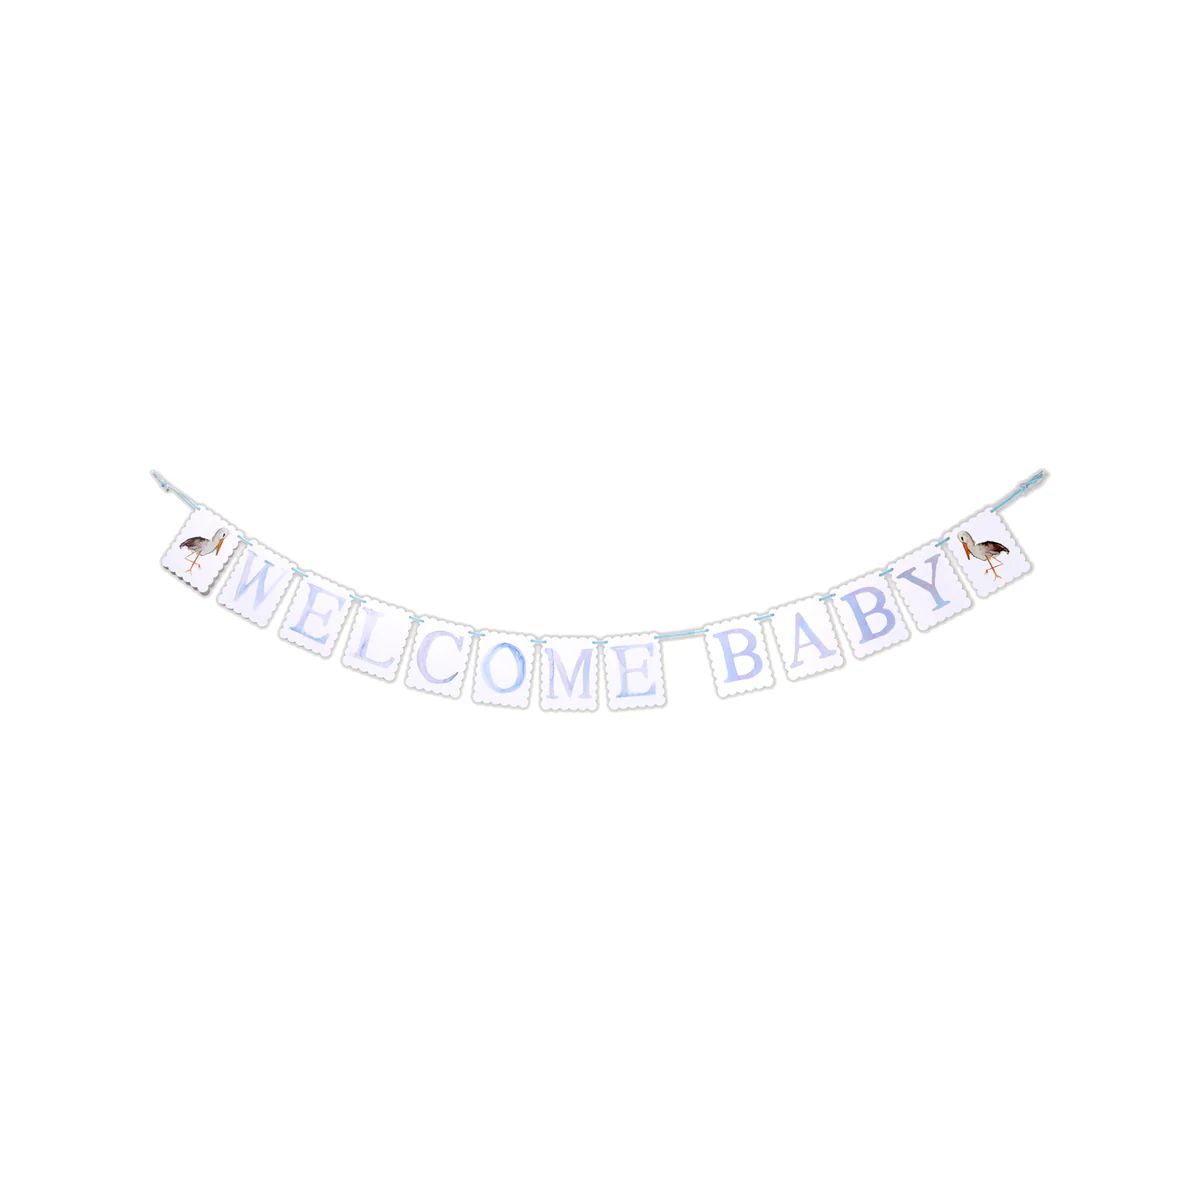 "Welcome Baby" Stork Banner | Over The Moon Gift